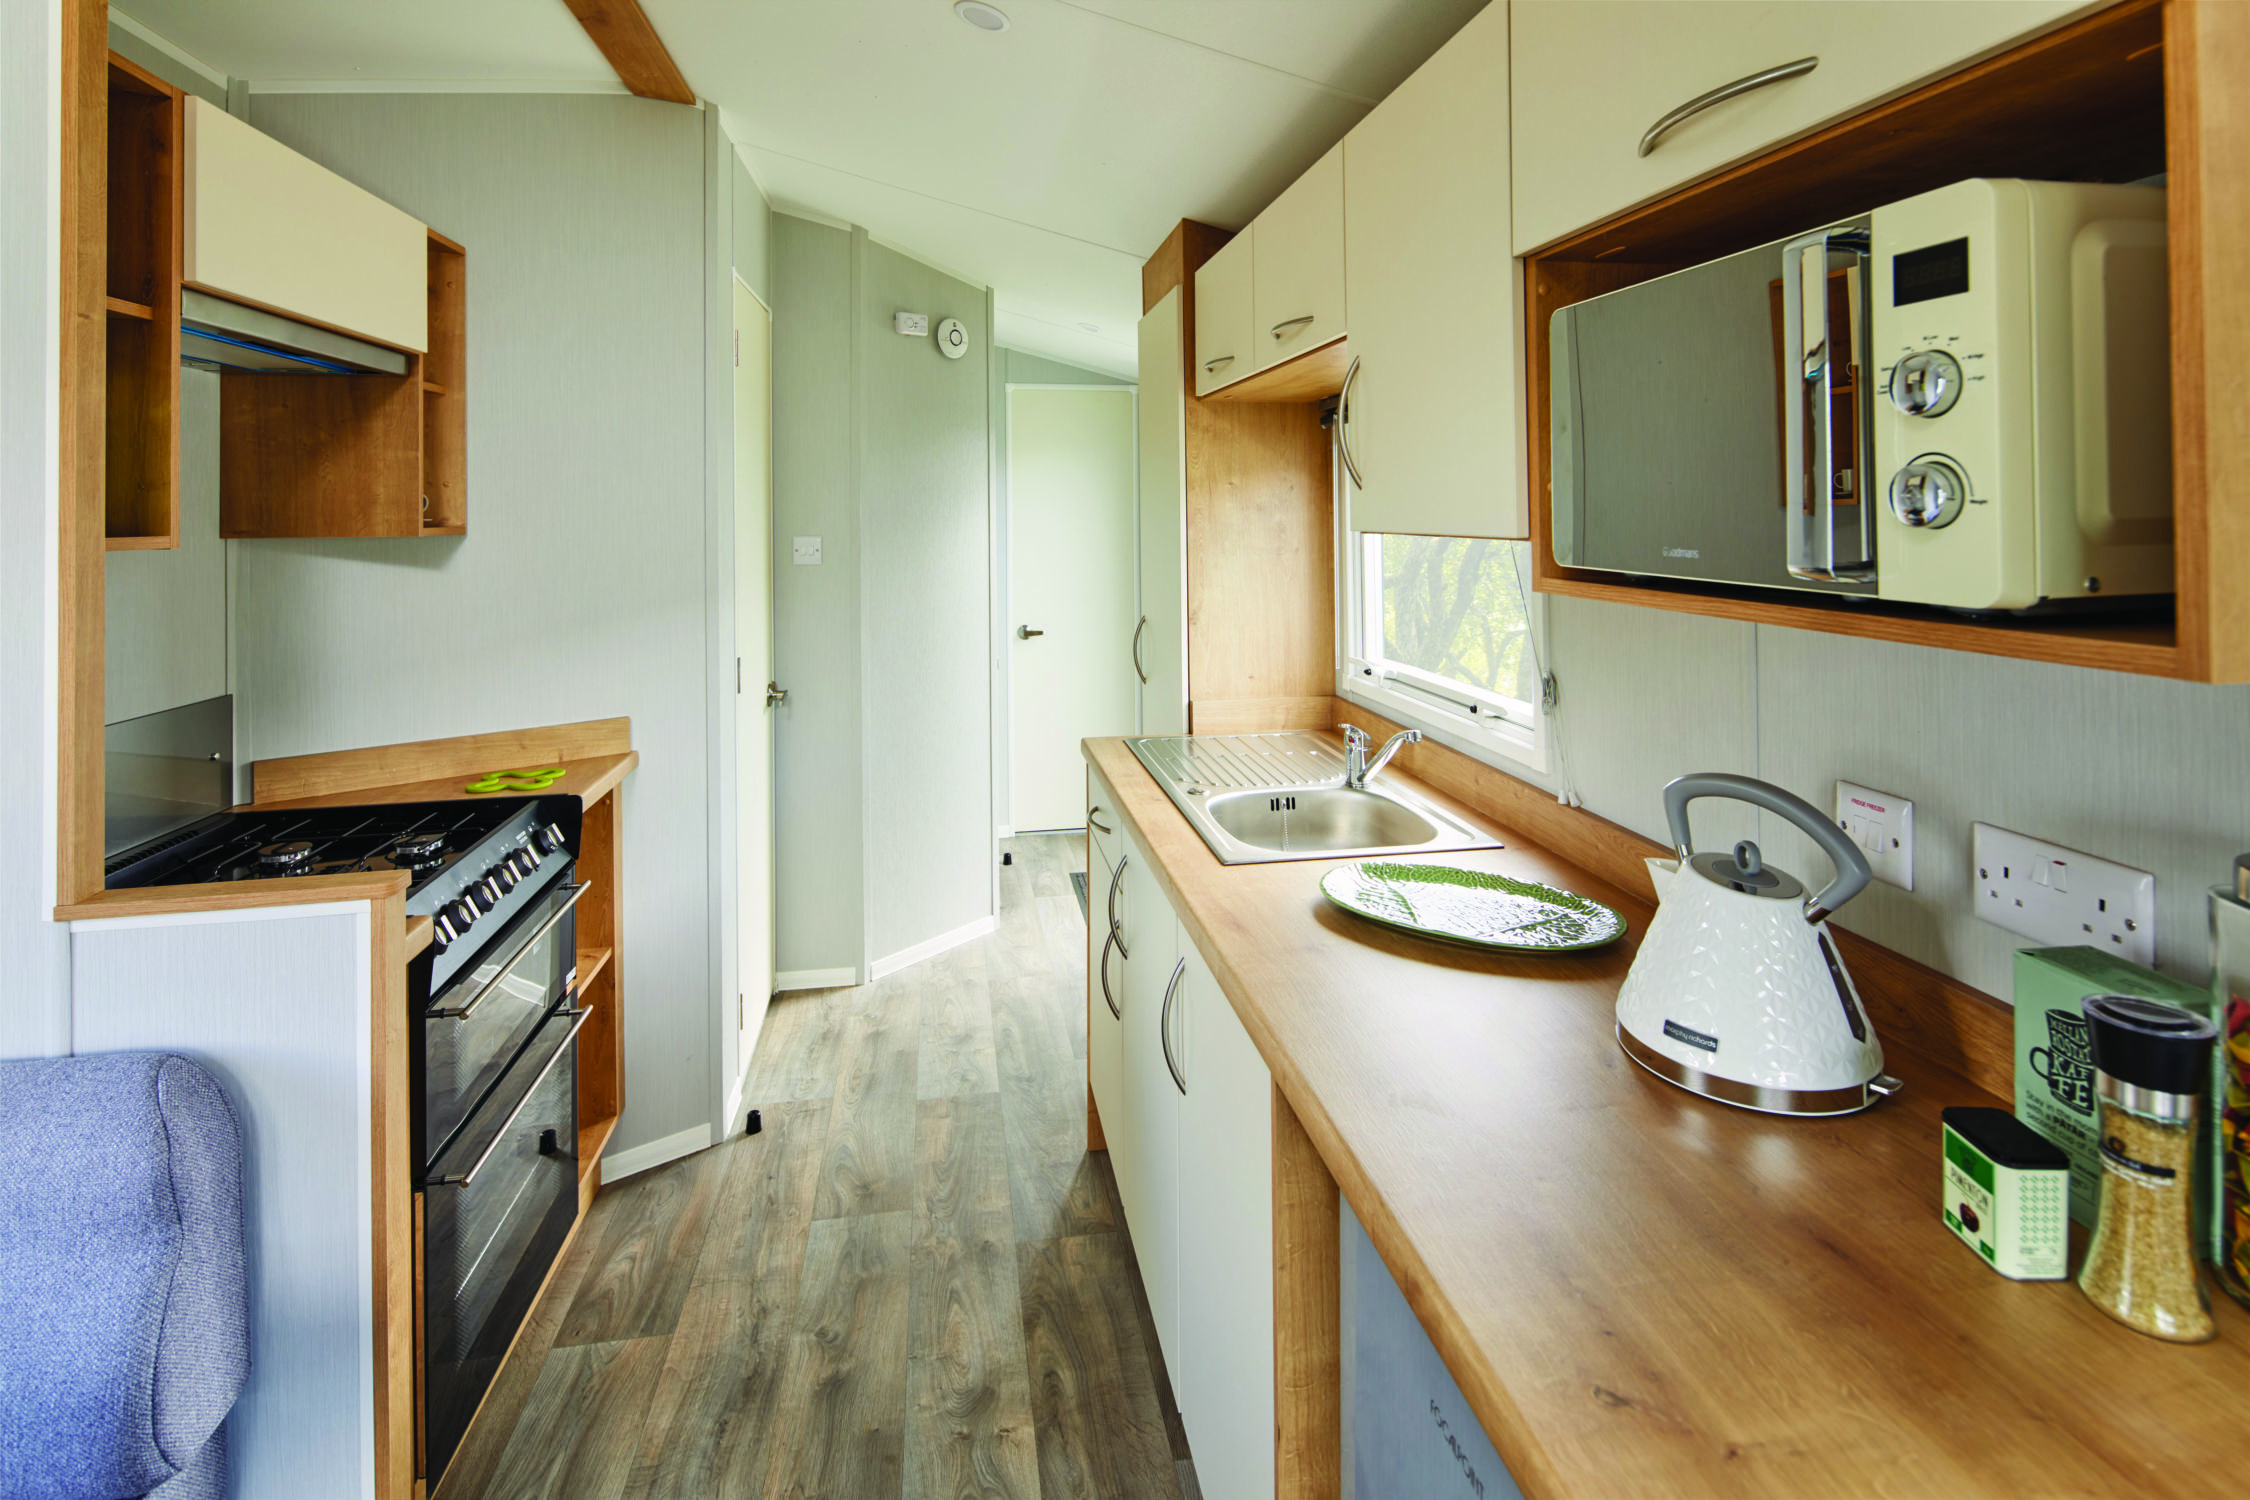 New Willerby Ashurst Galley Kitchen static caravan mobile home